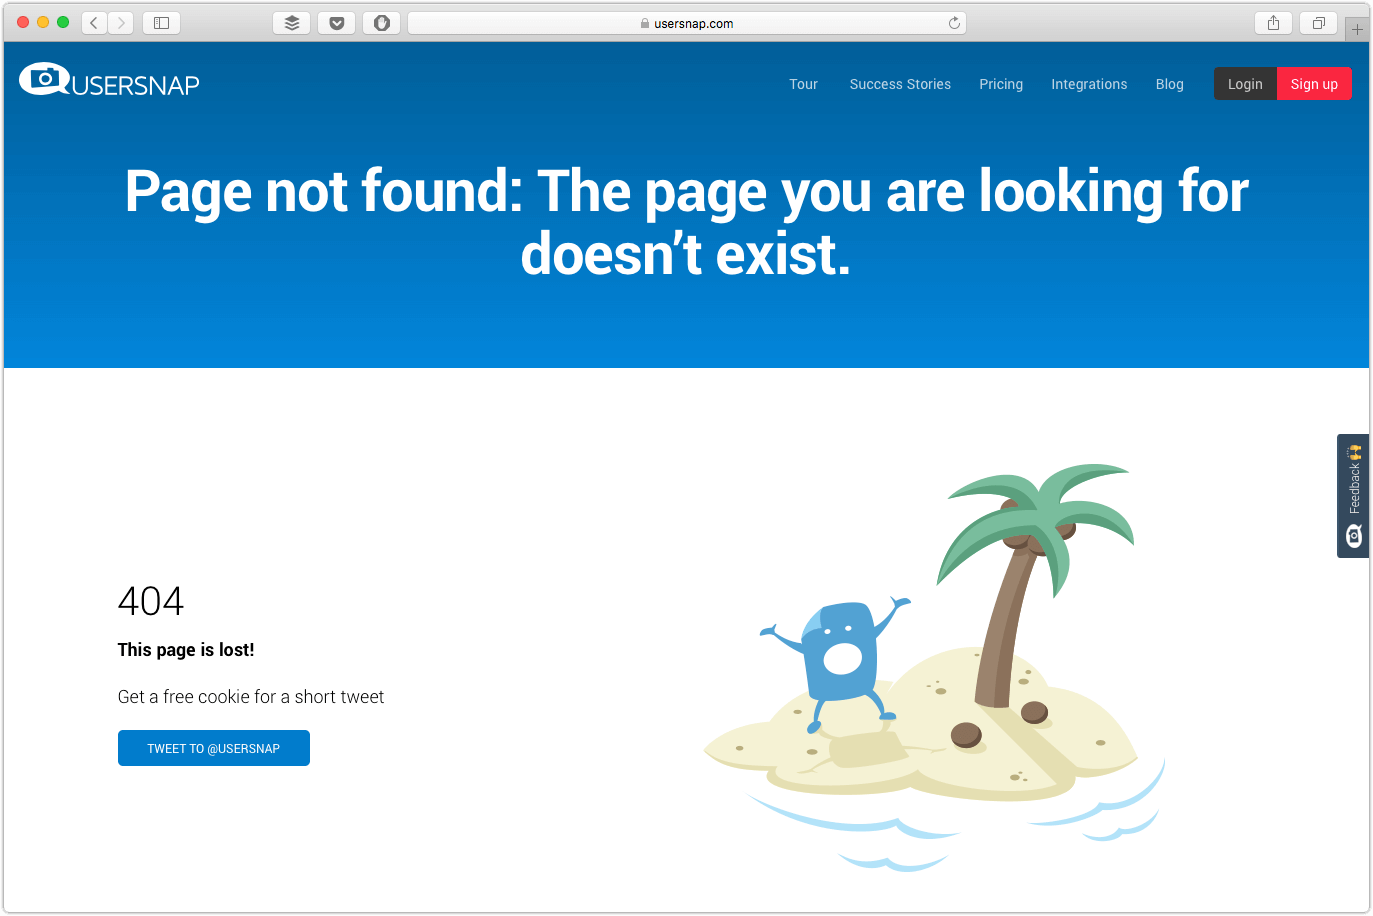 17 Creative 404 Error Pages From SaaS Companies!